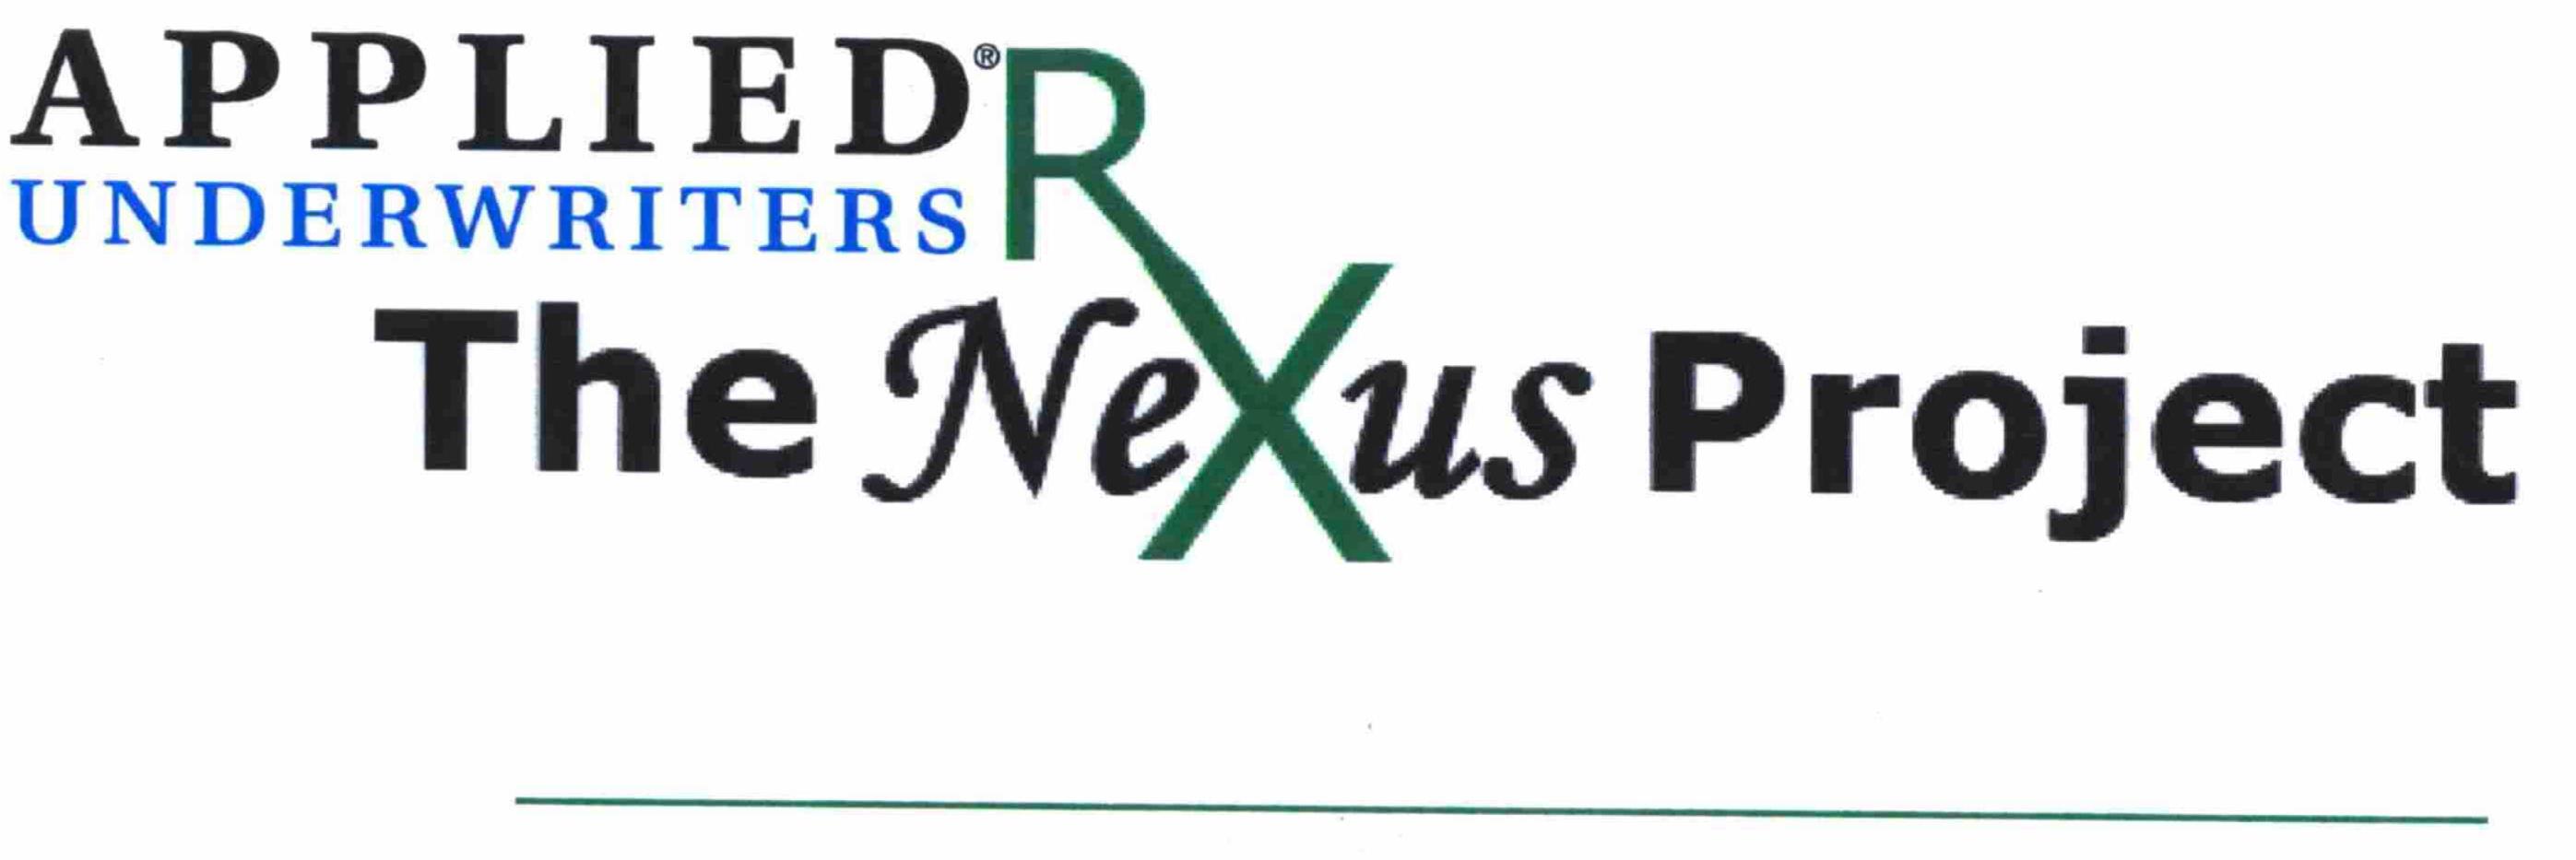  APPLIED UNDERWRITERS RX THE NEXUS PROJECT